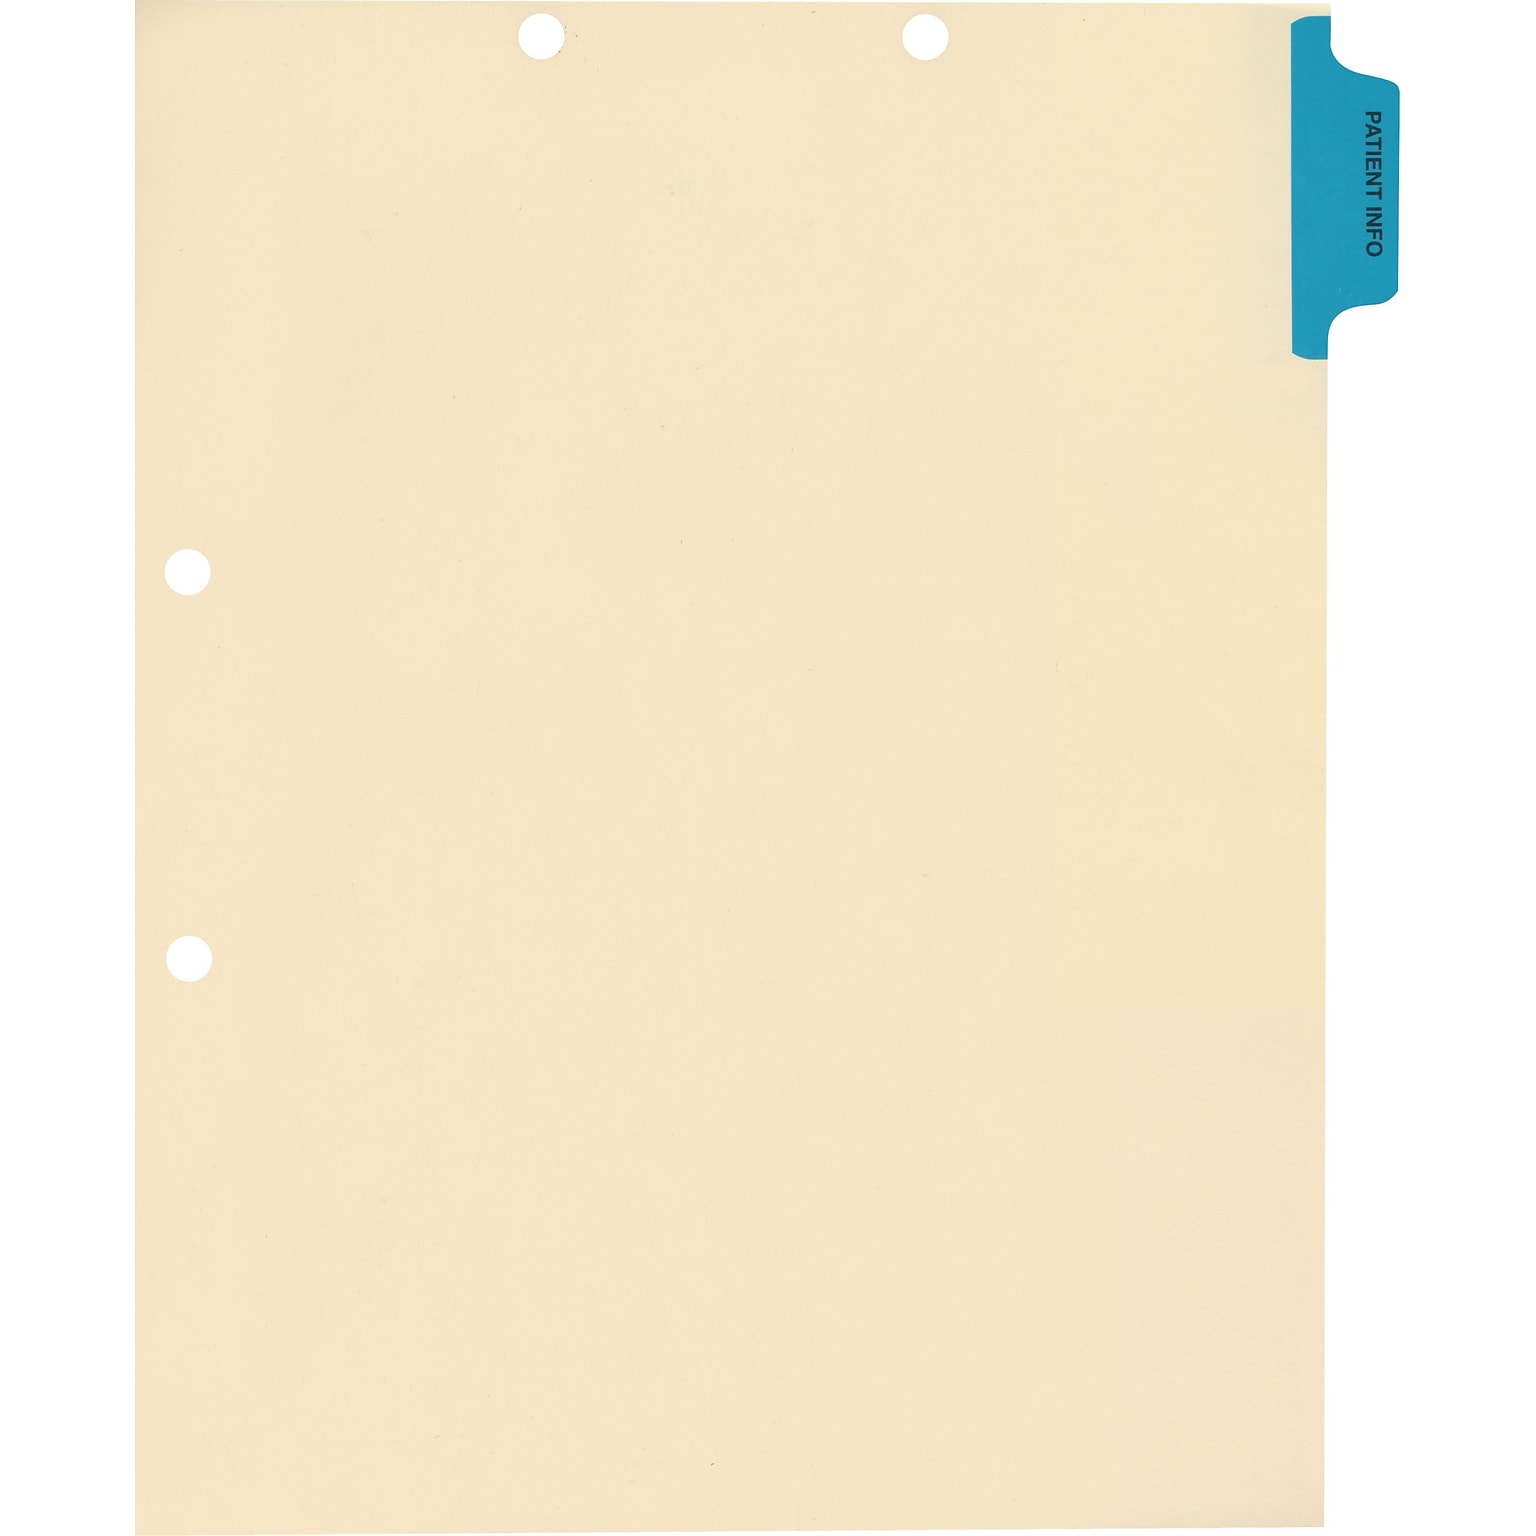 Medical Arts Press® Position 1 Colored Side-Tab Chart Dividers, Patient Info., Med. Blue